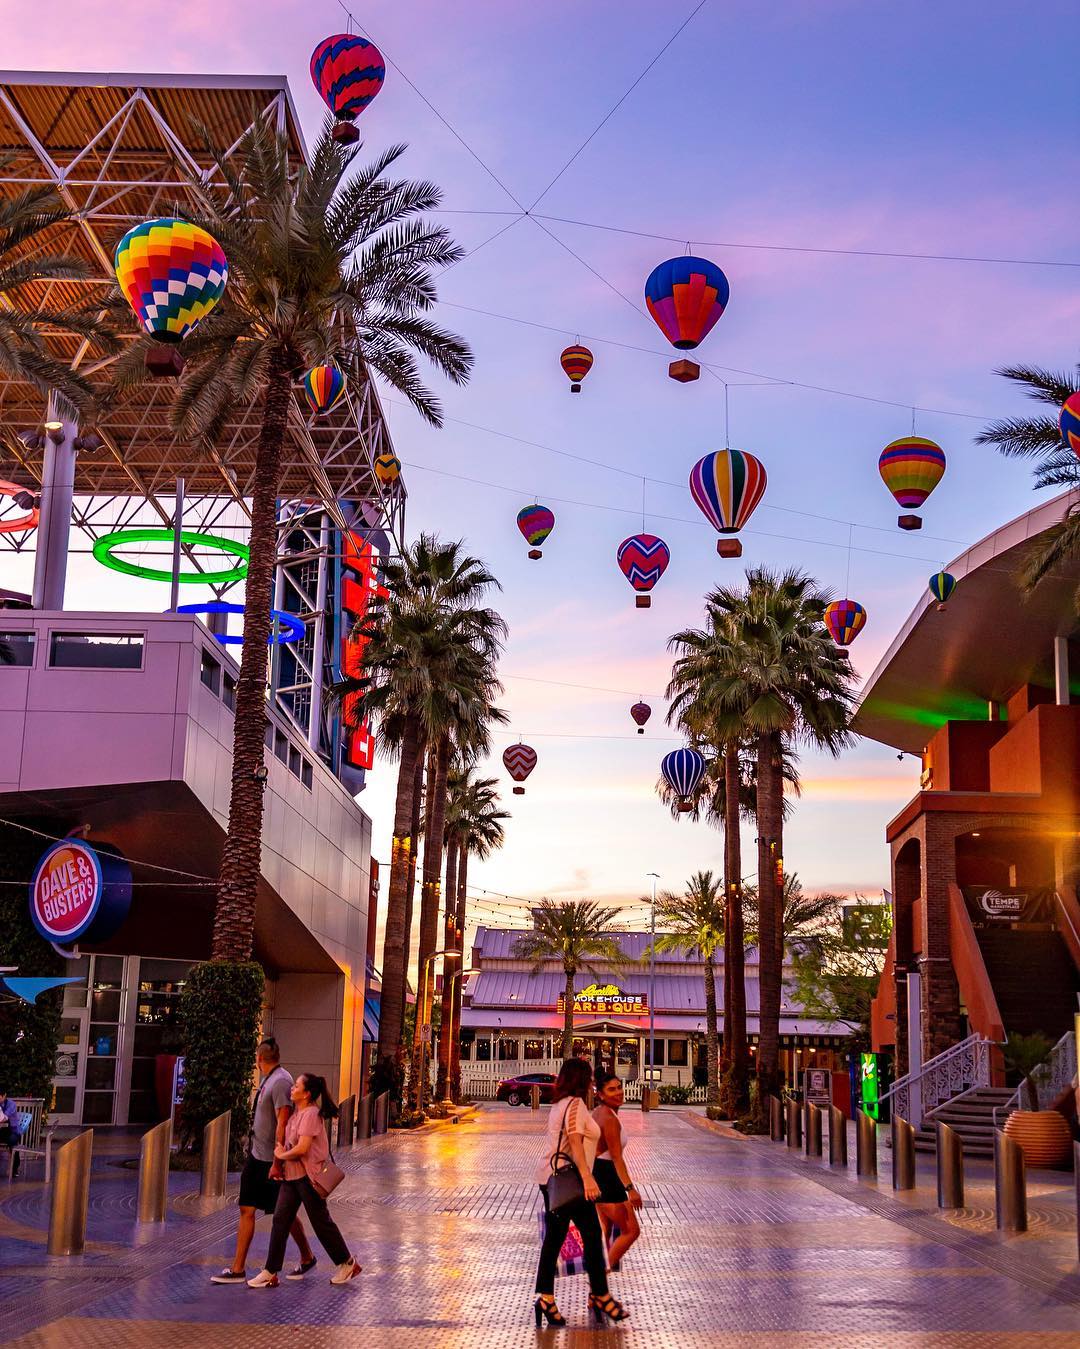 People Walking Around at Tempe Marketplace Under Fake Hot Air Balloons. Photo by Instagram user @tempemarketplace